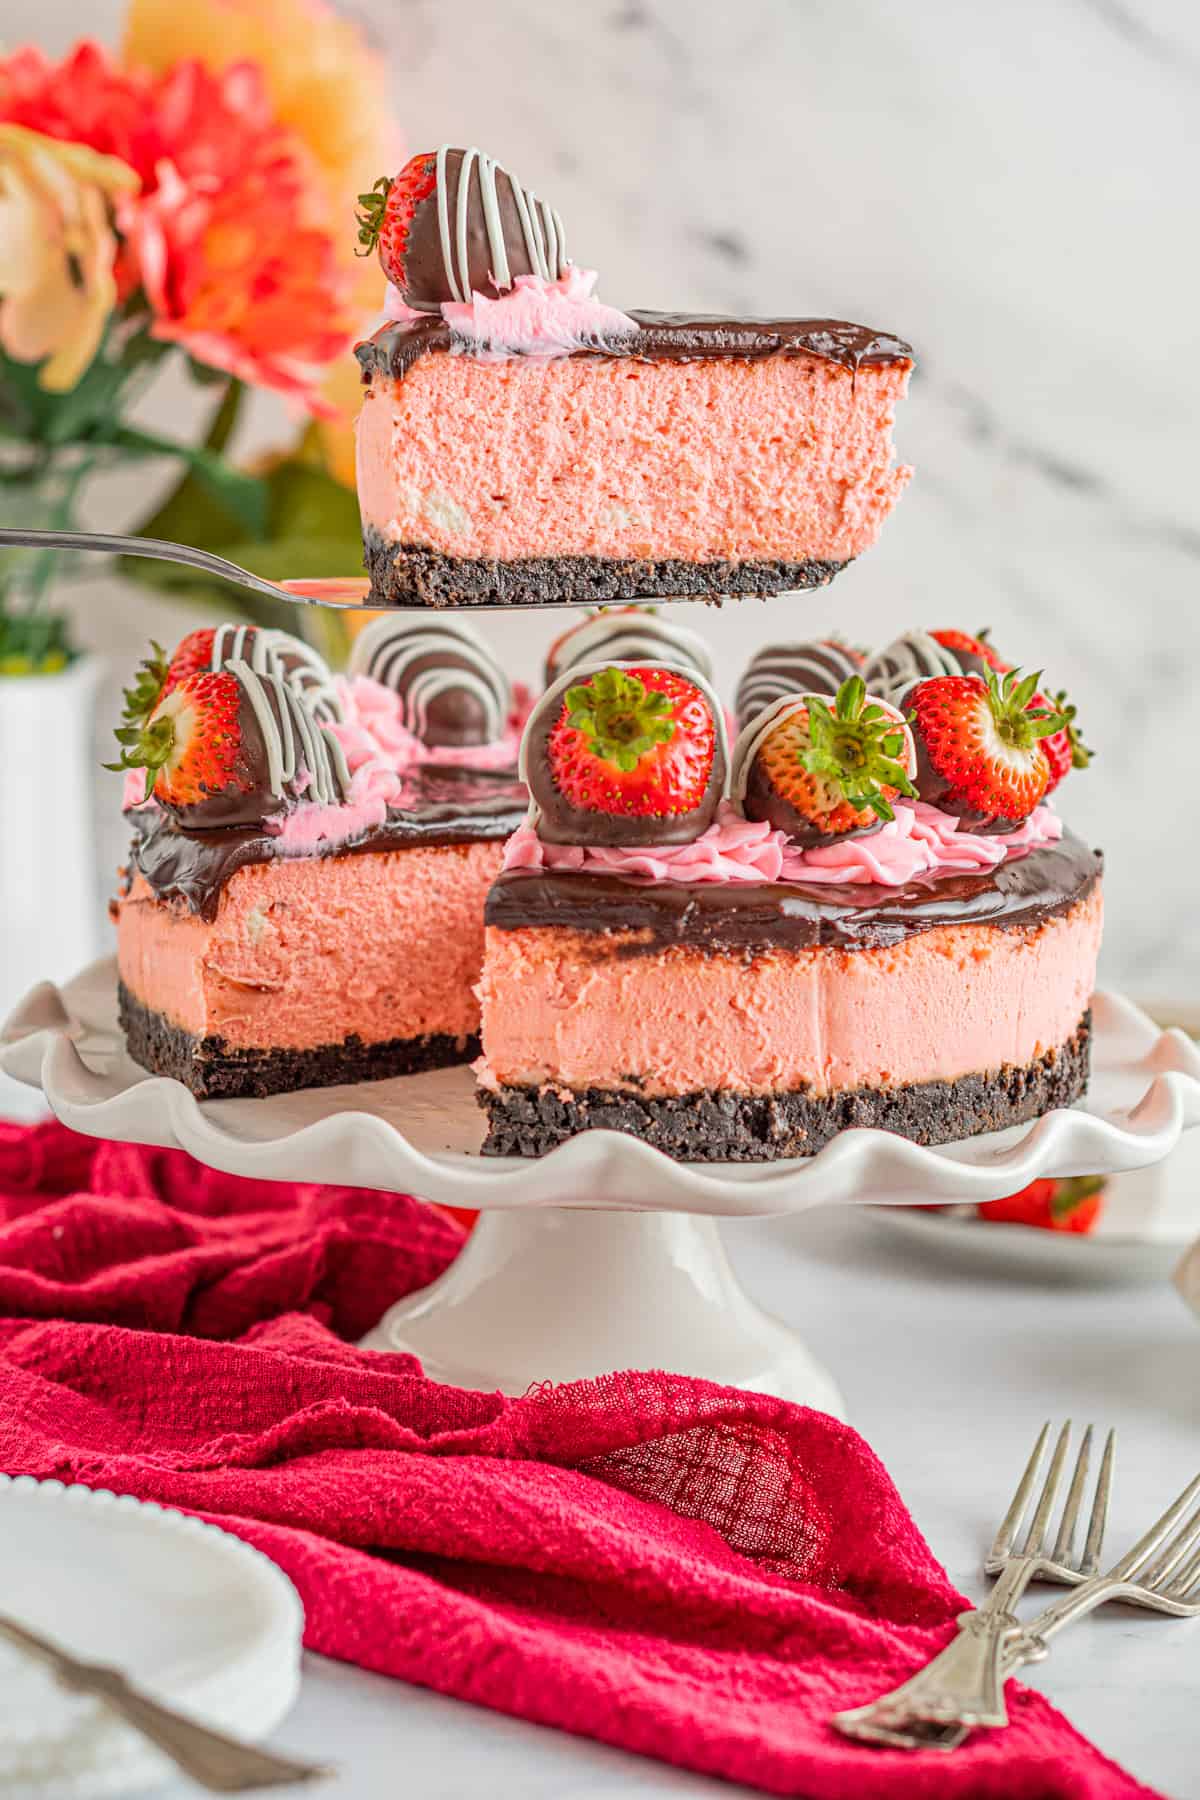 a slice of chocolate covered strawberry cheesecake on a cake server above a chocolate covered strawberry cheesecake.